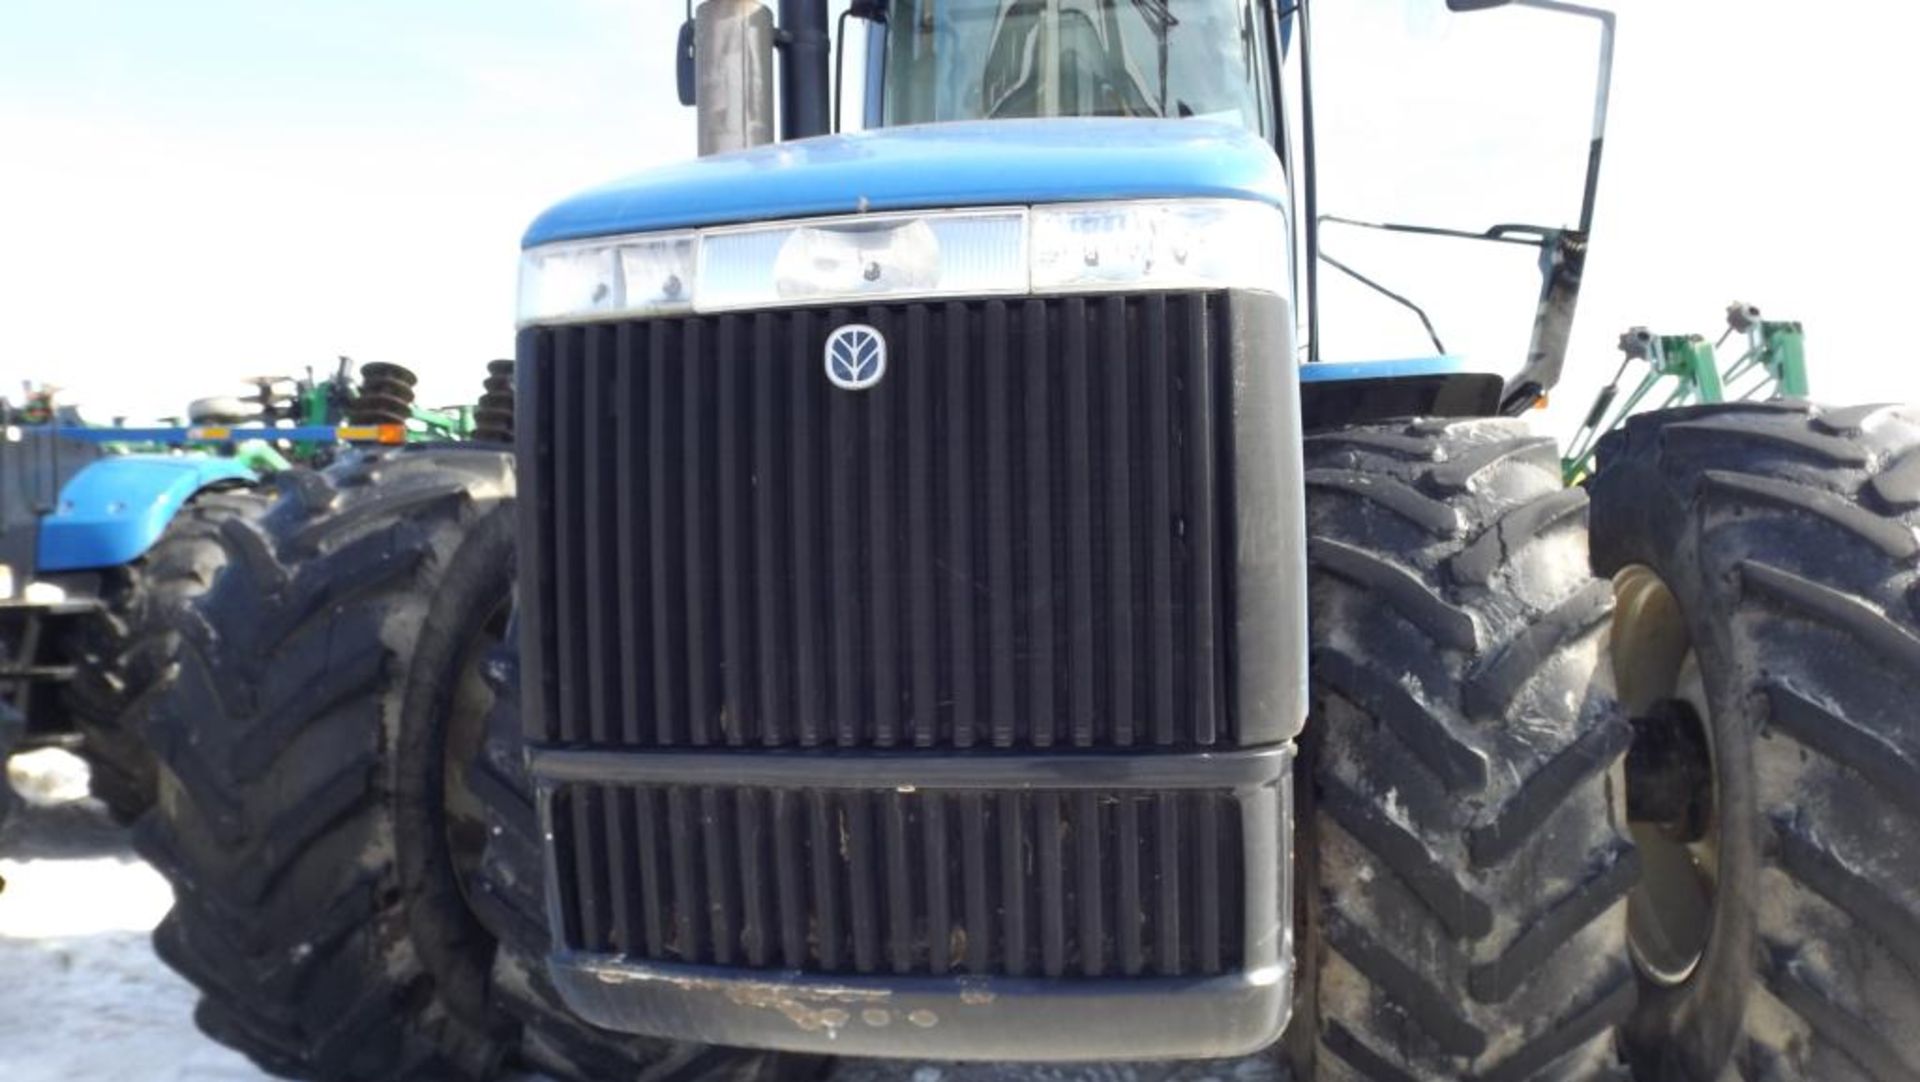 New Holland TJ500 Tractor '05, sn#RVS005048 4617 Hrs, 4WD, Fully Equipped Cab, 500 HP, 16/2 PS, - Image 9 of 24